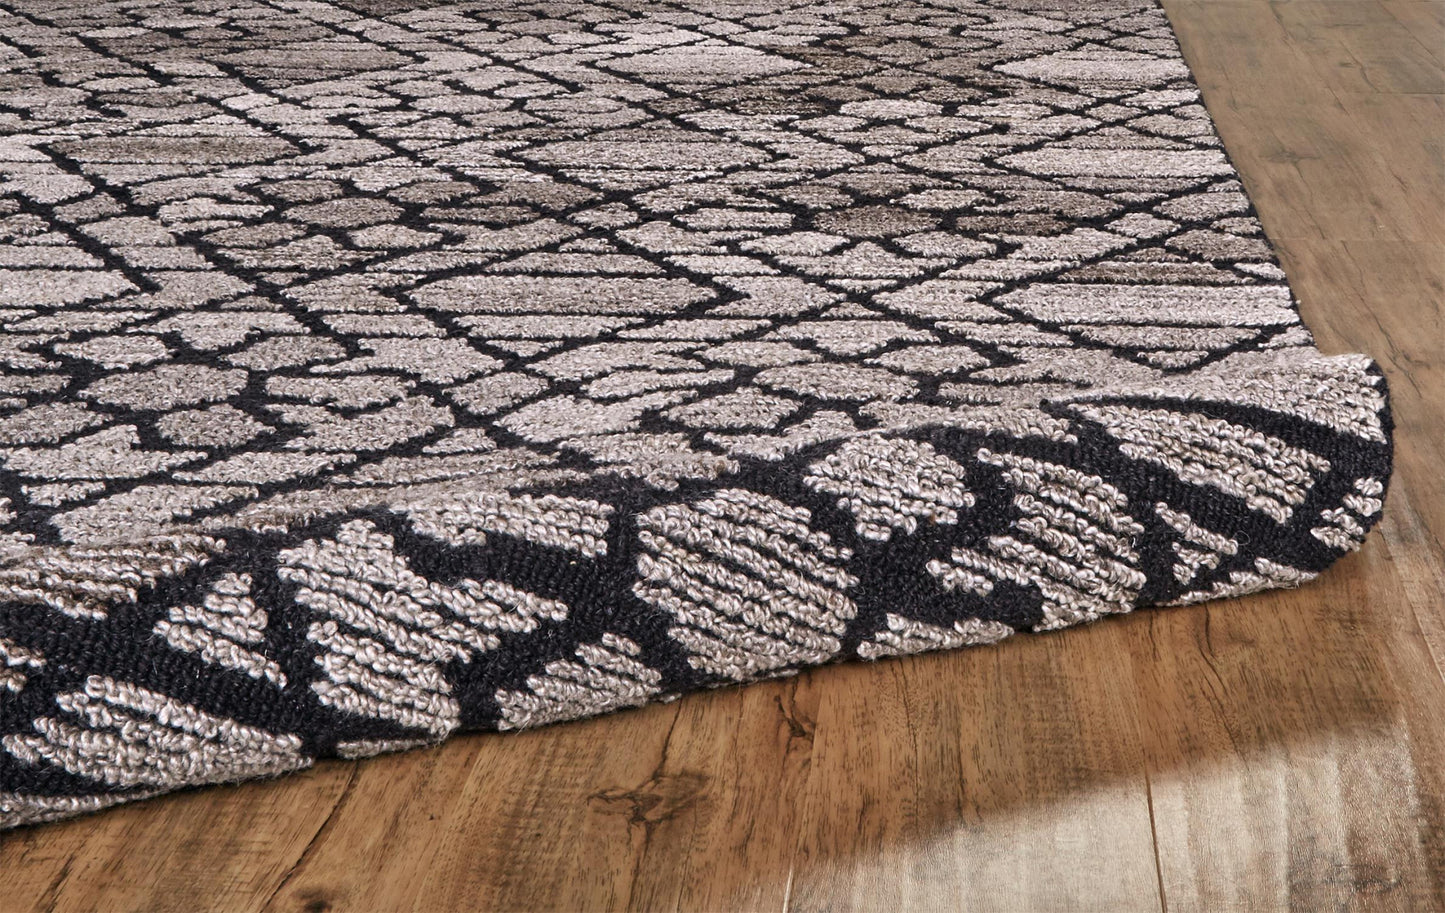 4' X 6' Taupe Black And Gray Wool Paisley Tufted Handmade Area Rug